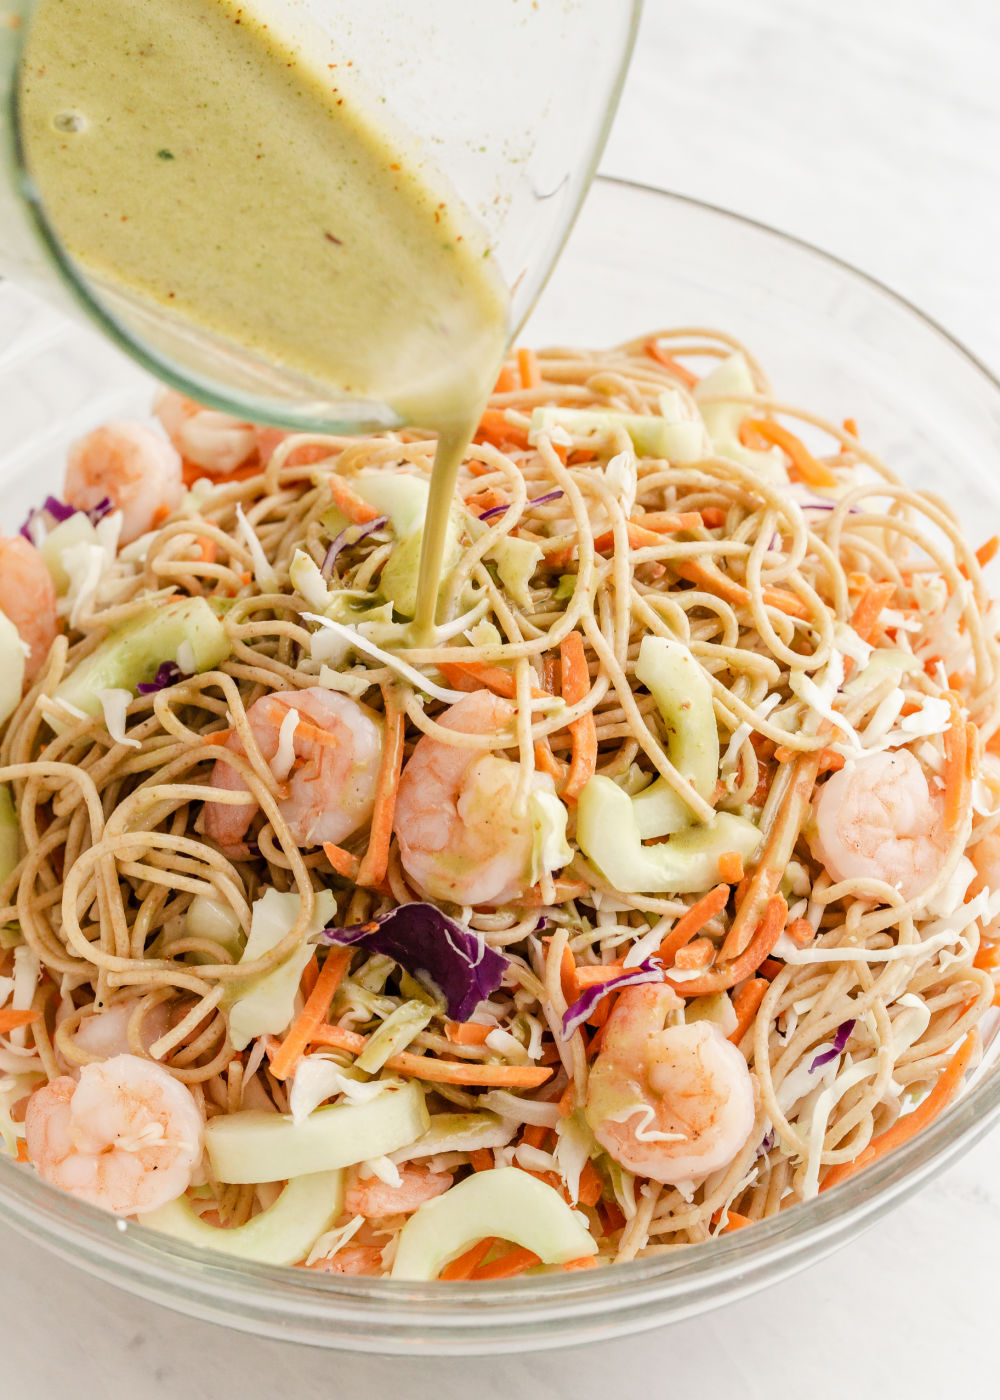 pouring dressing over mixed pasta salad with shrimp.